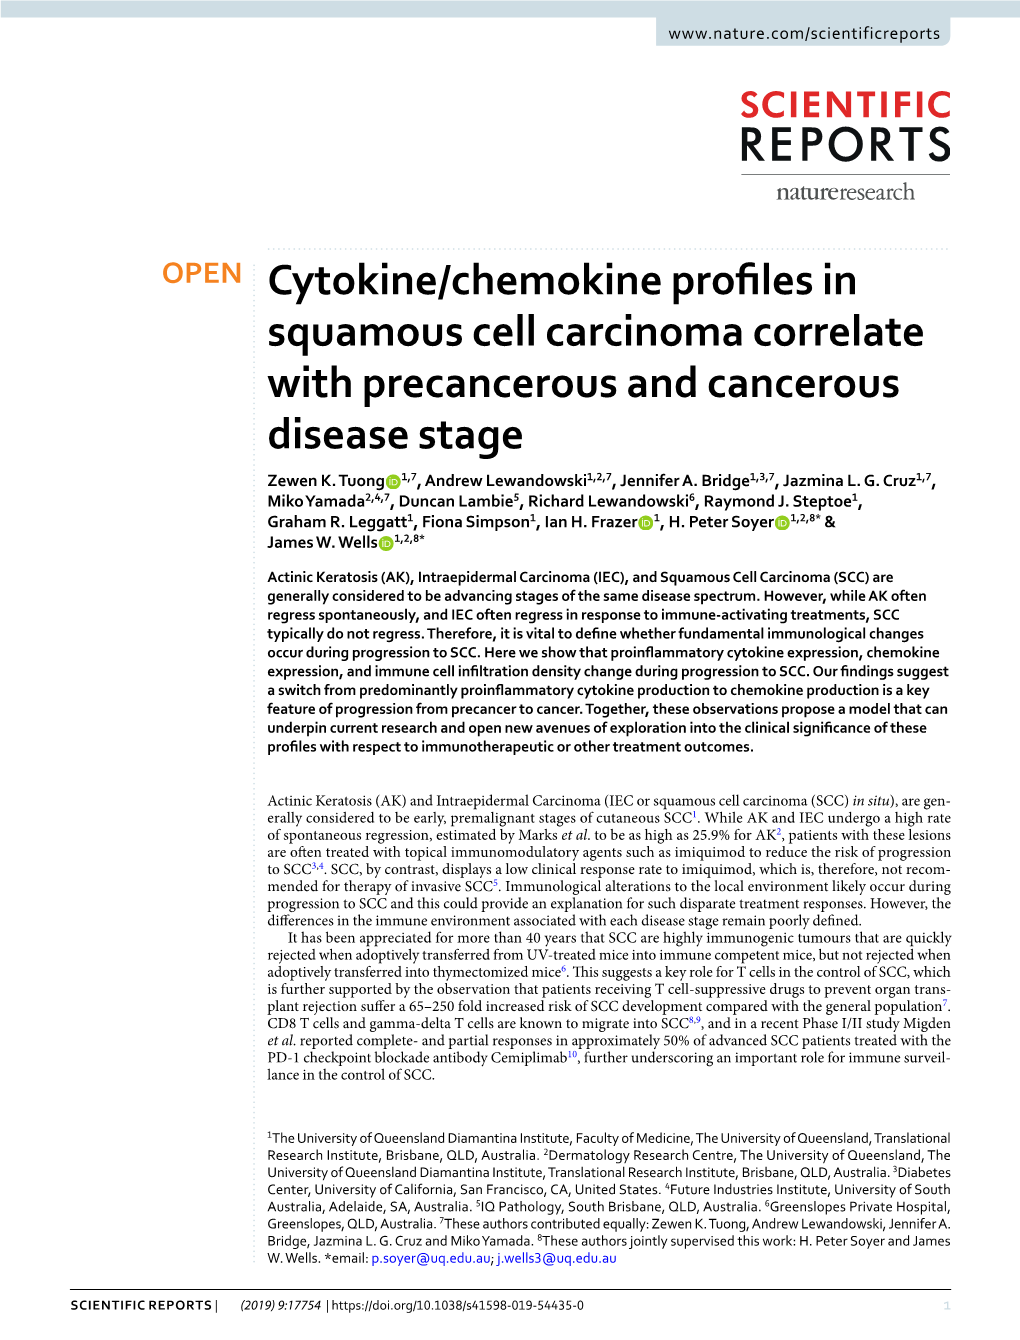 Cytokine/Chemokine Profiles in Squamous Cell Carcinoma Correlate with Precancerous and Cancerous Disease Stage